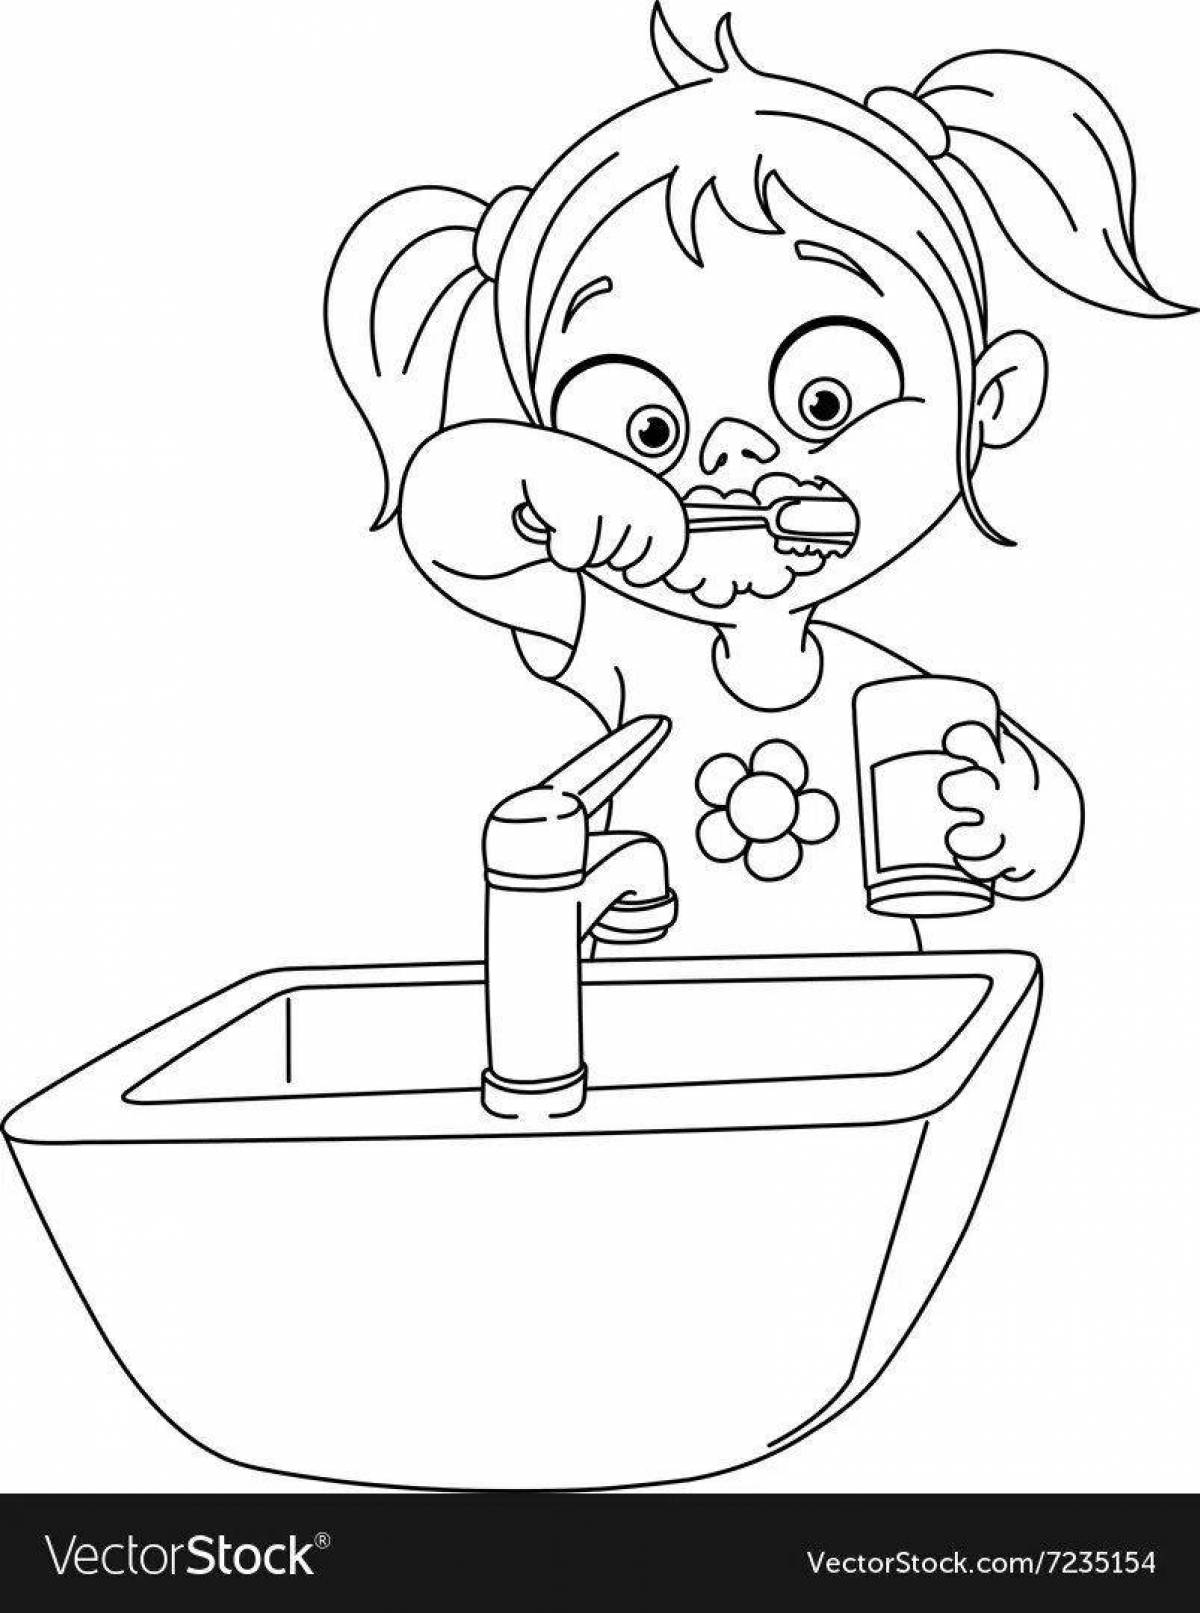 Adorable I wash my face coloring page